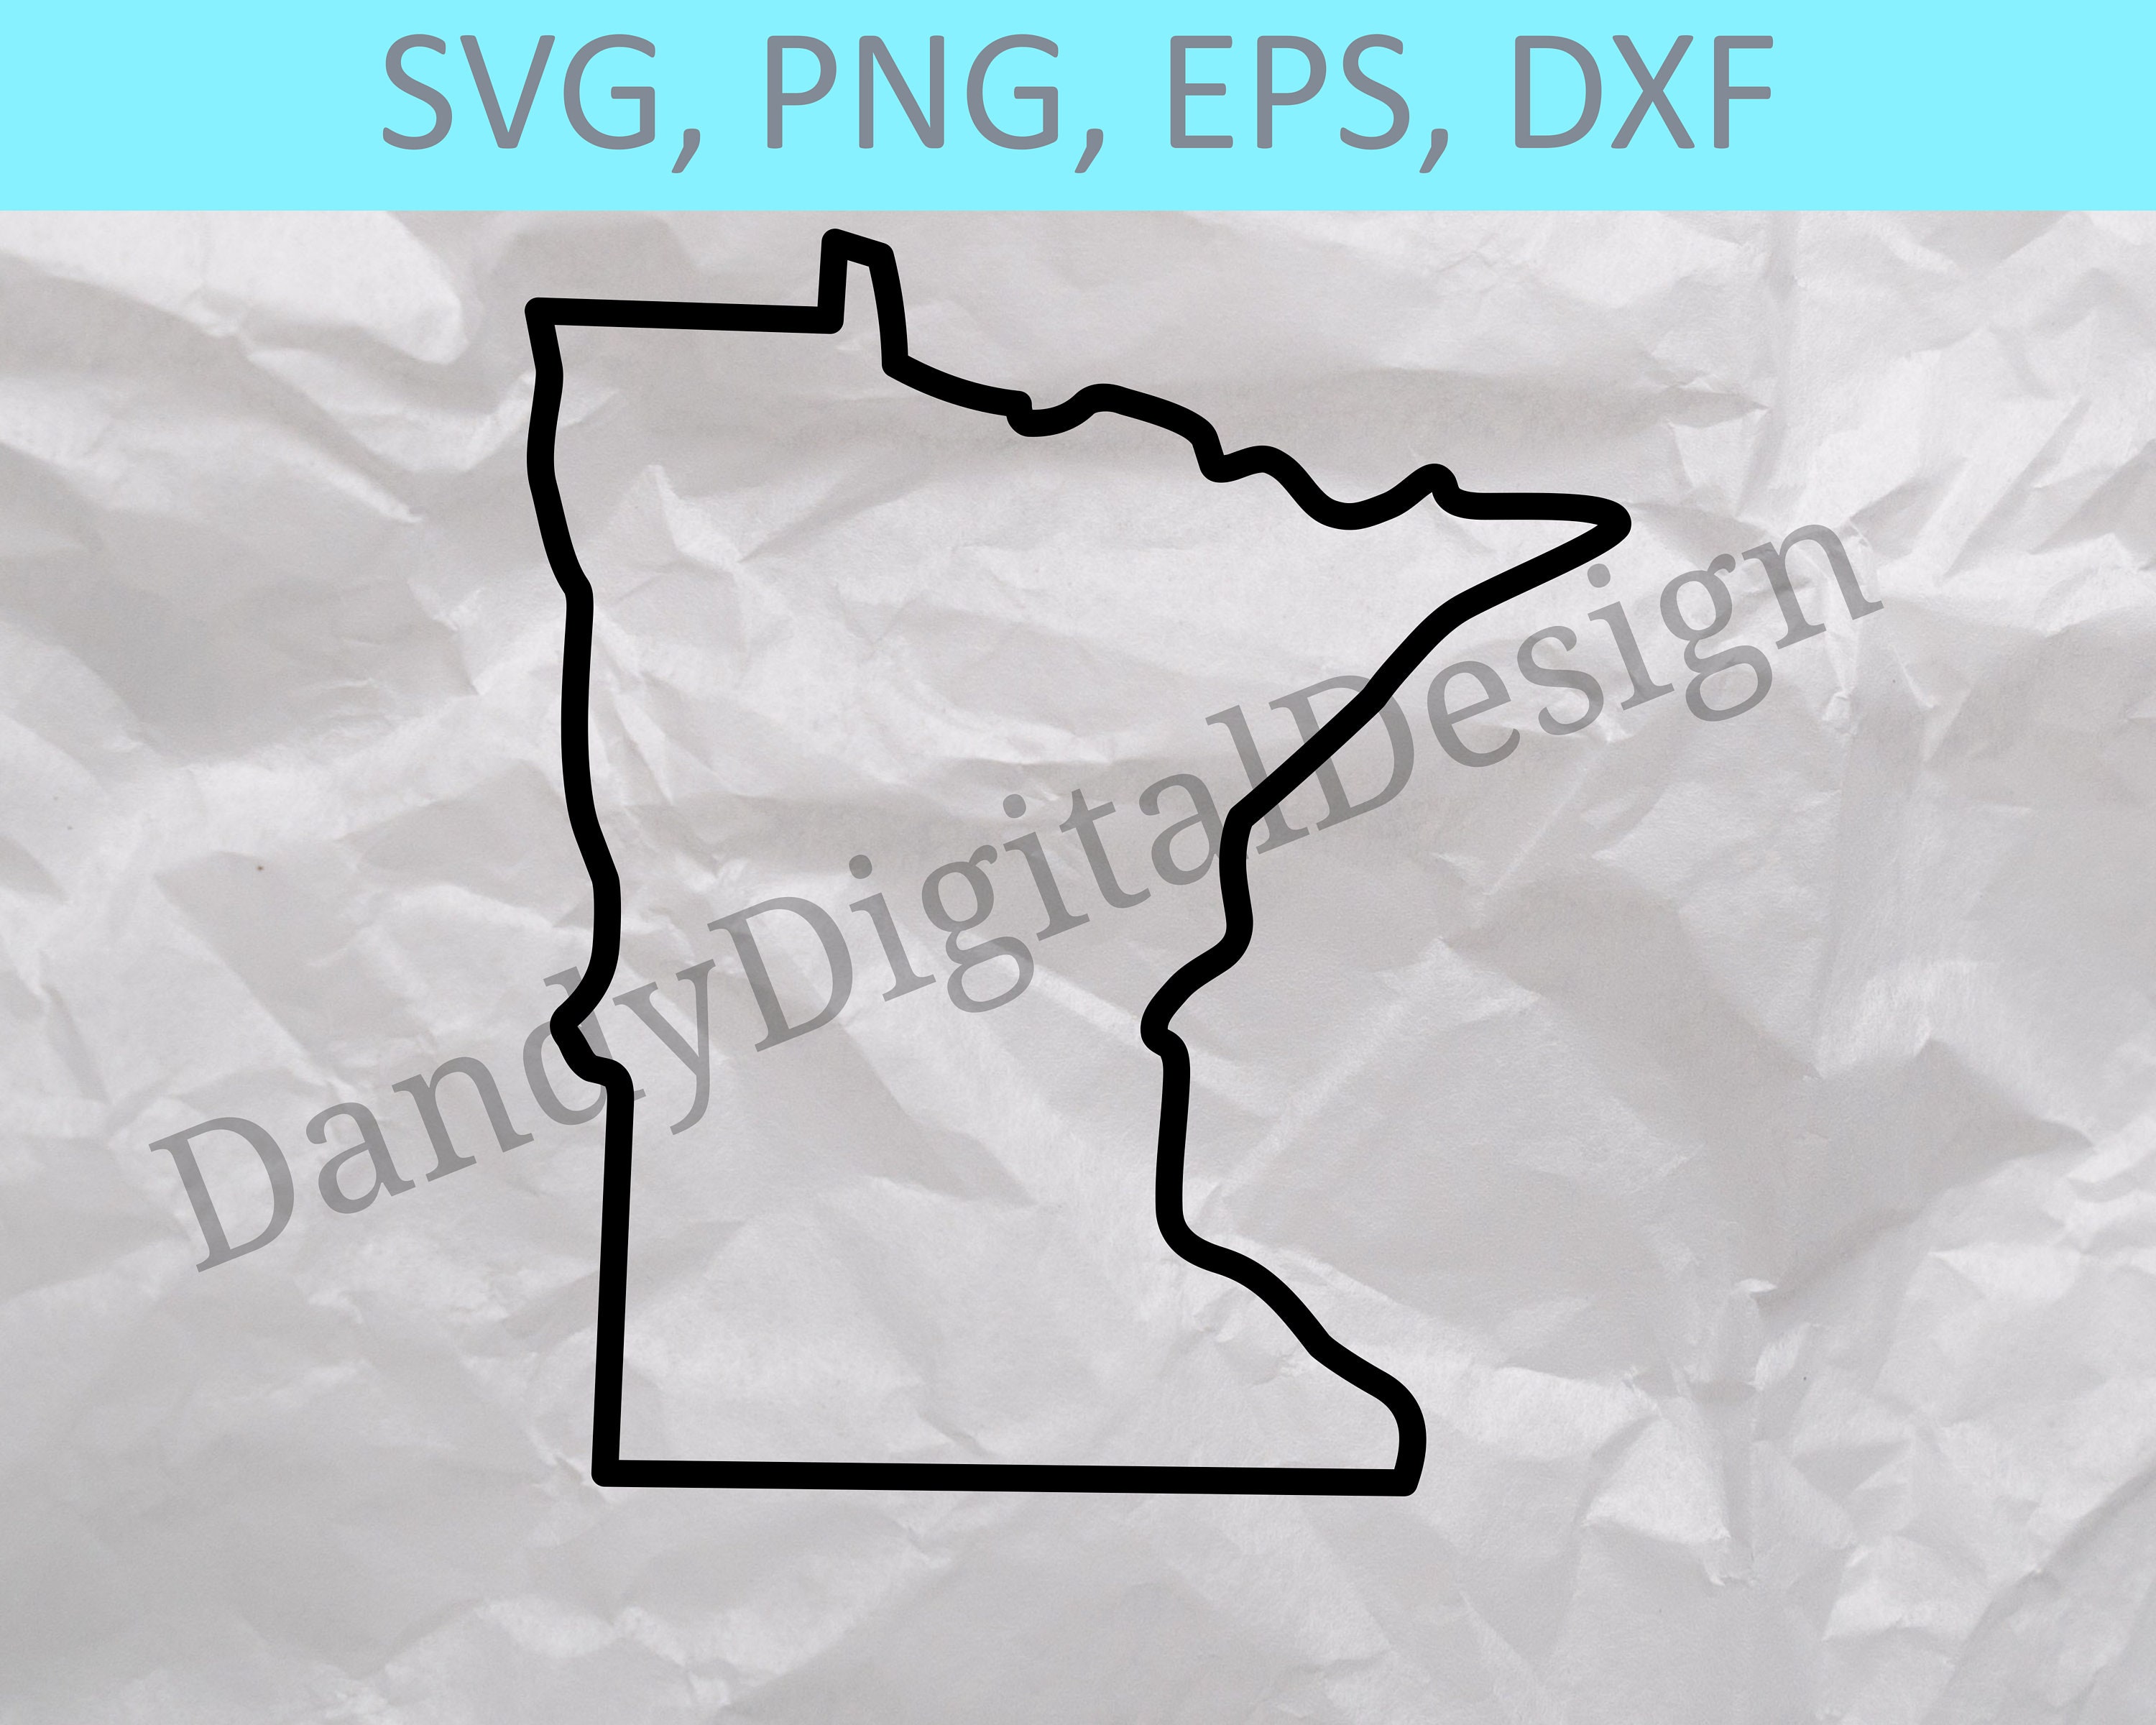 180px-Map_of_Minnesota_highlighting_Ramsey_County.svg.png